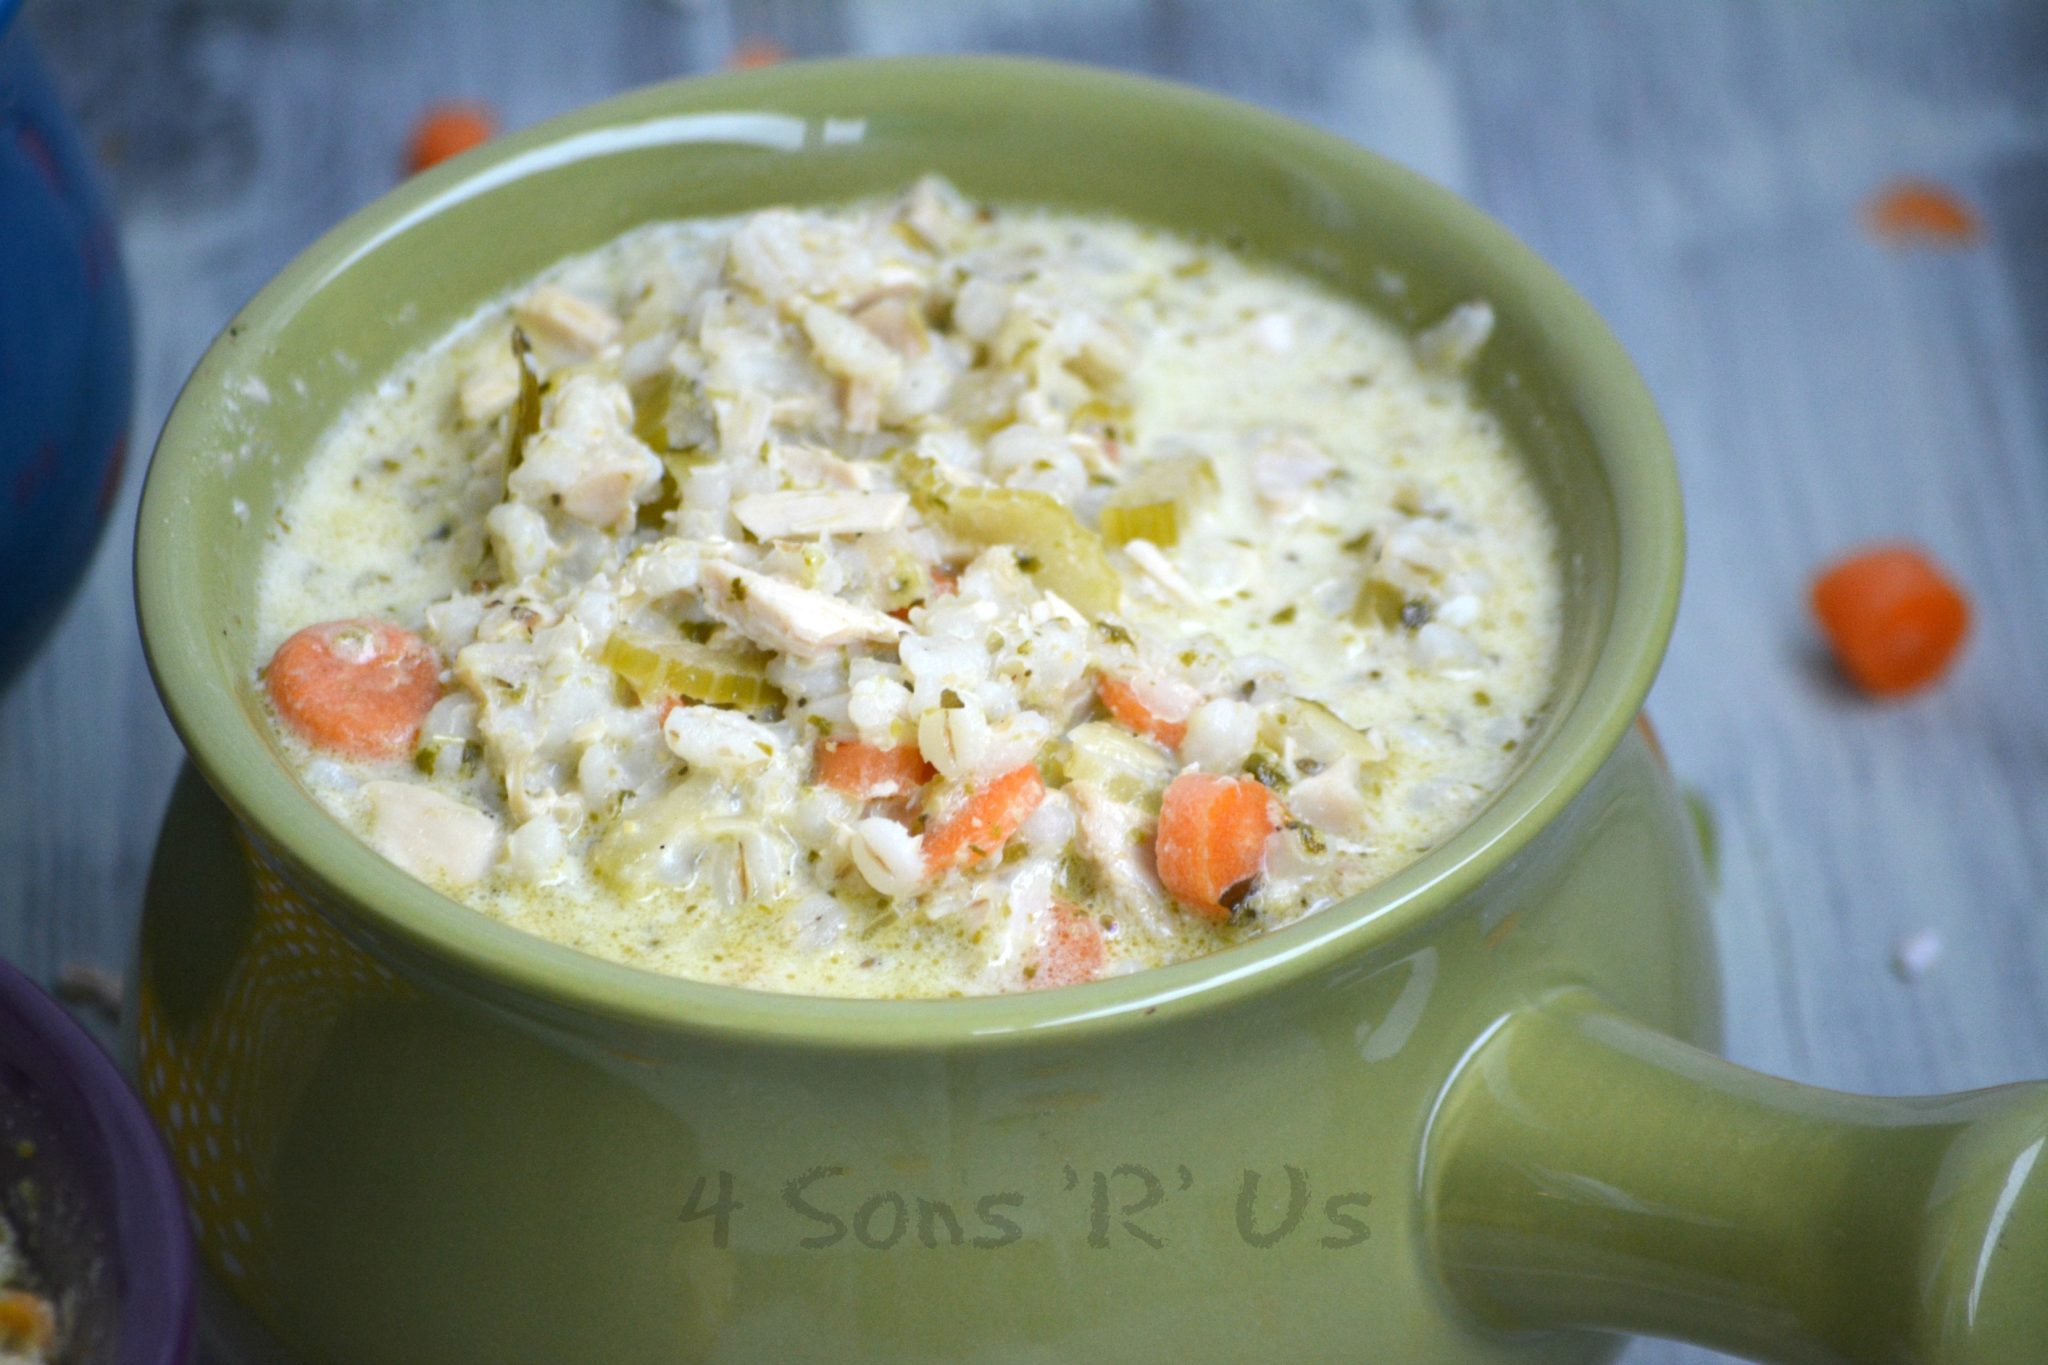 Crockpot Chicken And Pesto Soup - 4 Sons 'R' Us